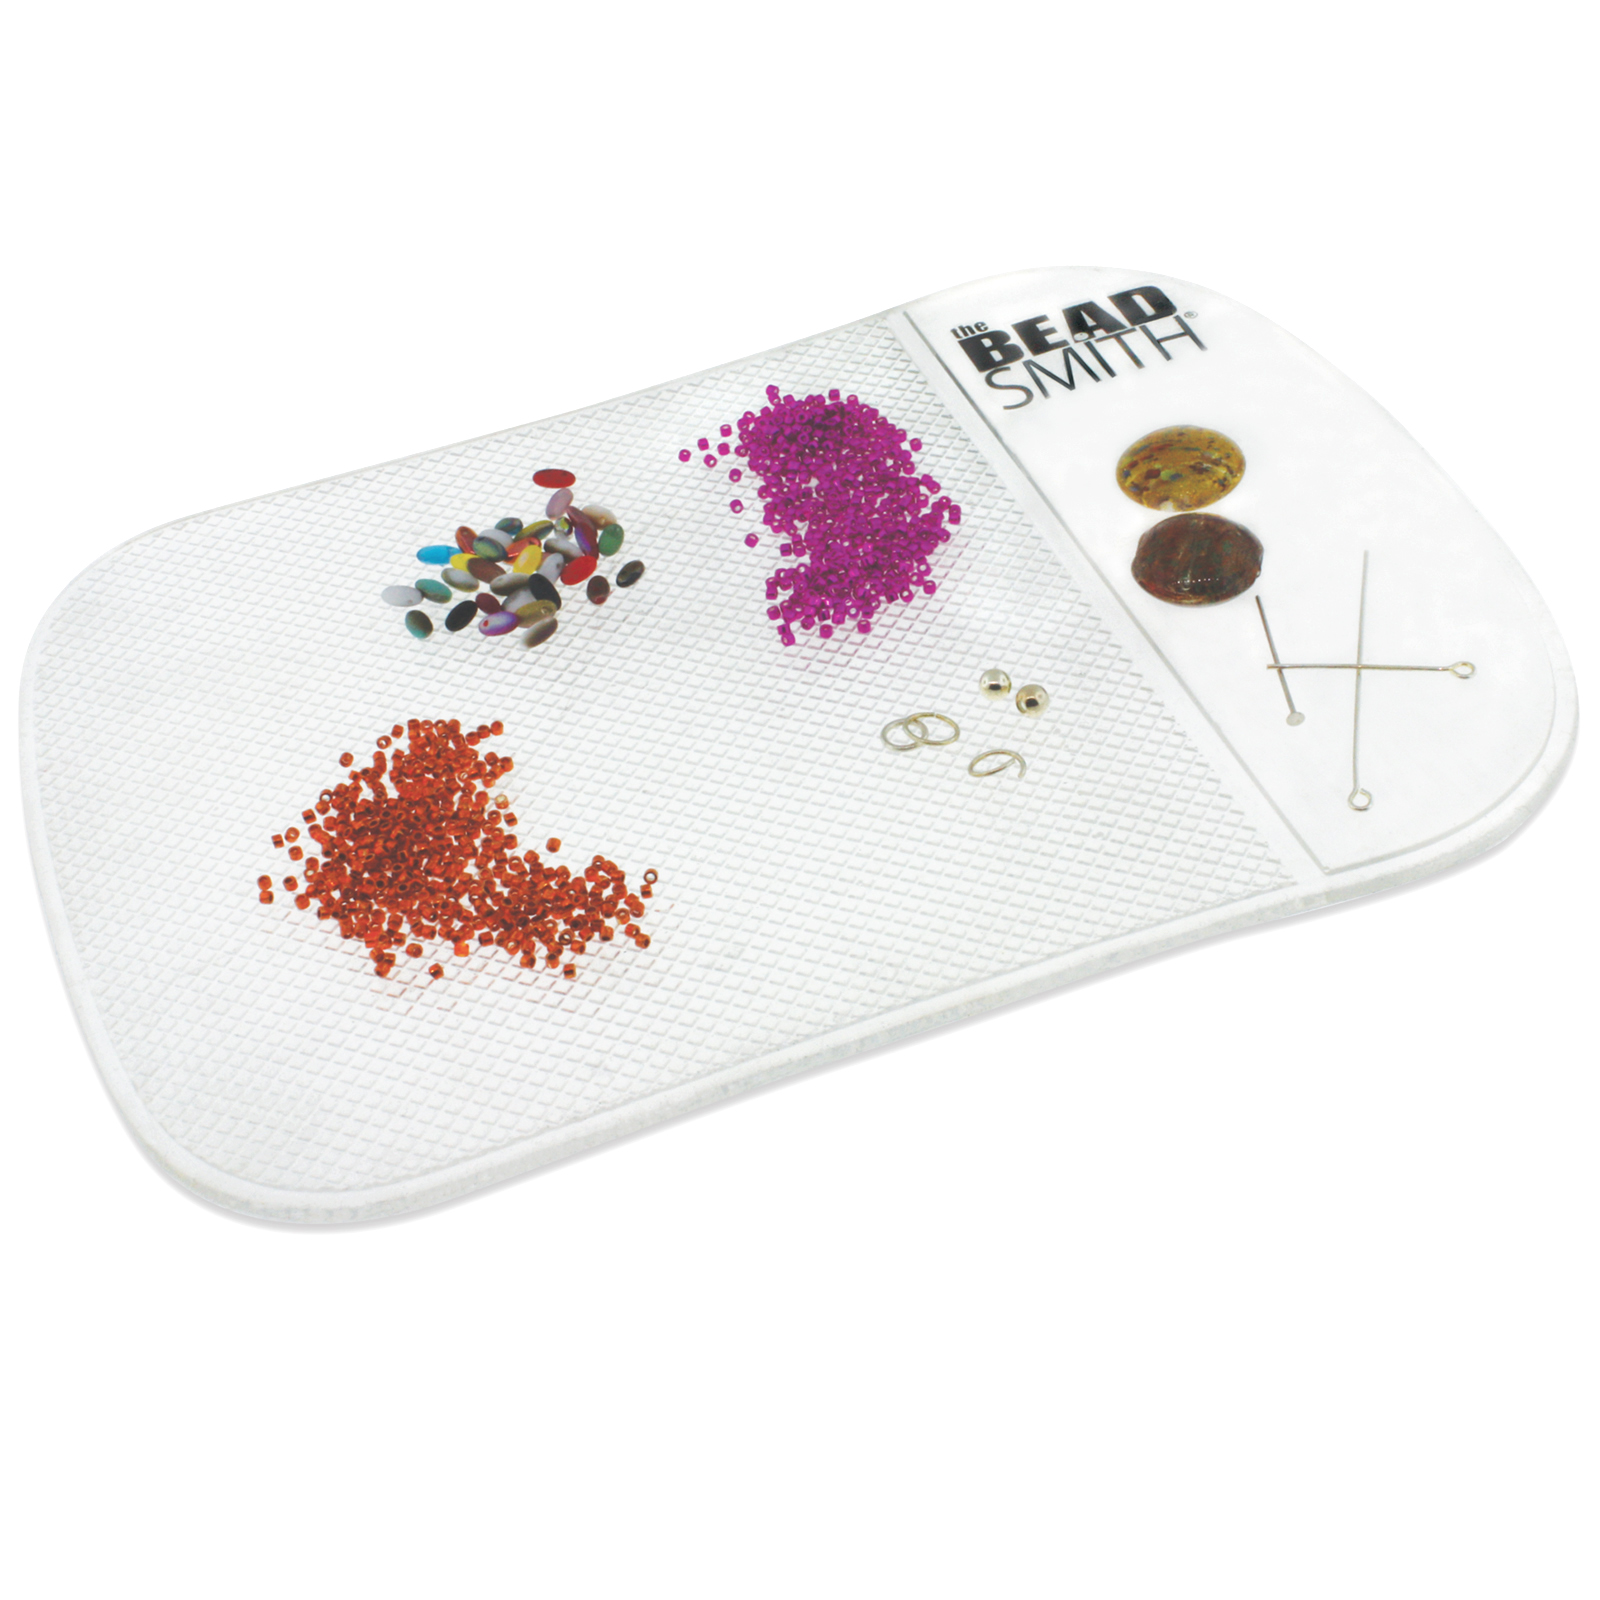 The Beadsmith® Clear Sticky Bead Mat®